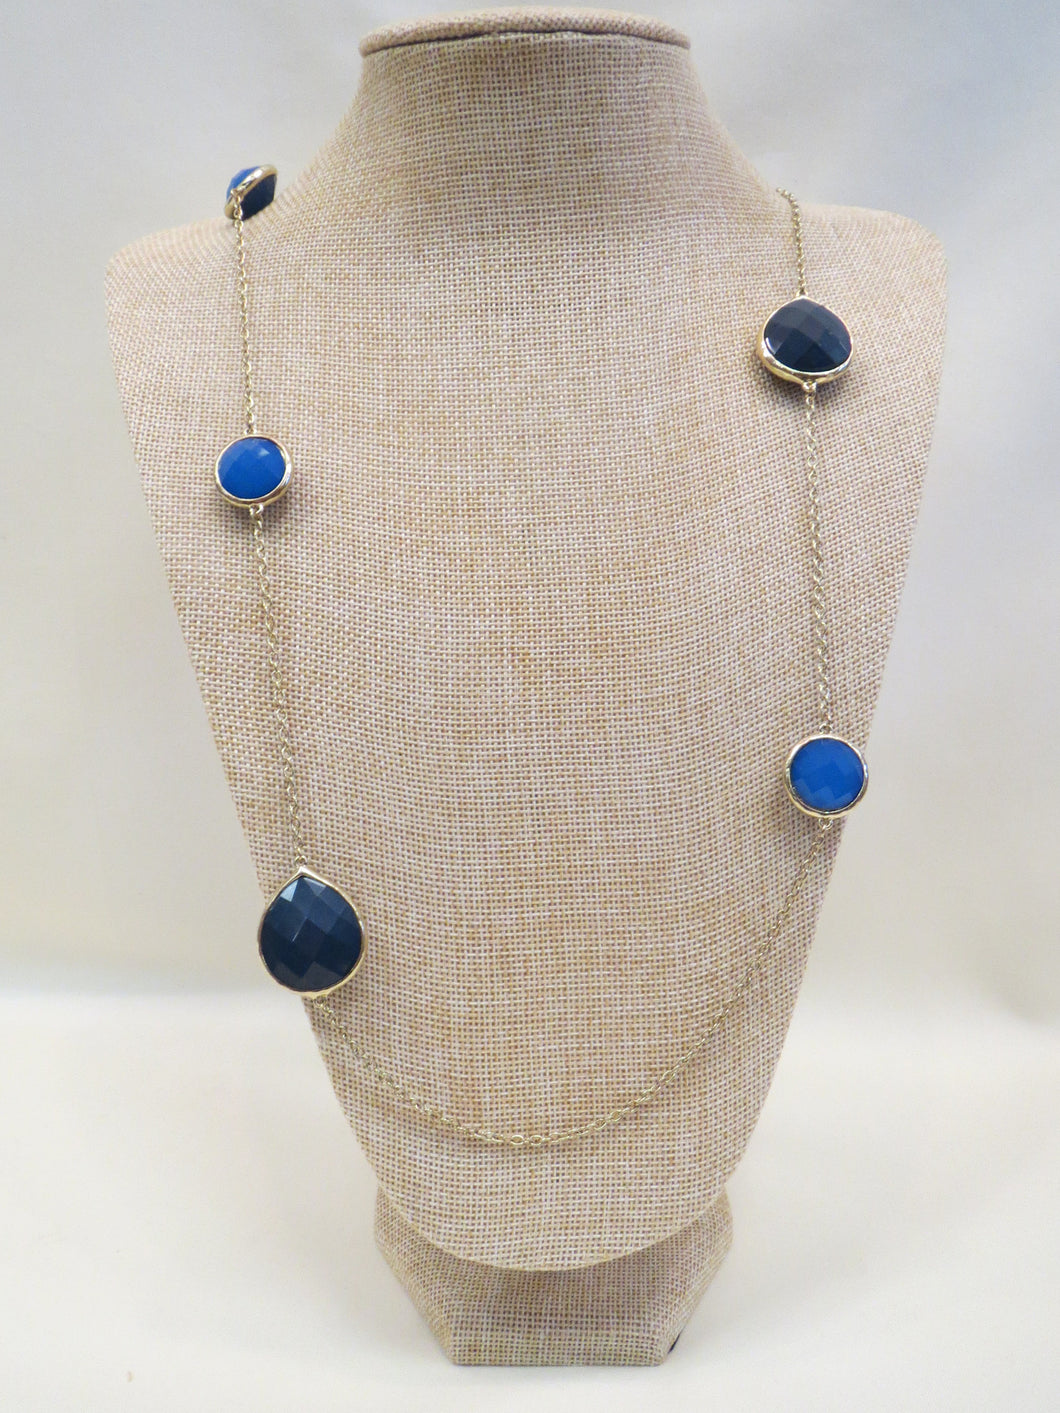 ADO | Blue Stone Necklace Long Gold Chain - All Decd Out